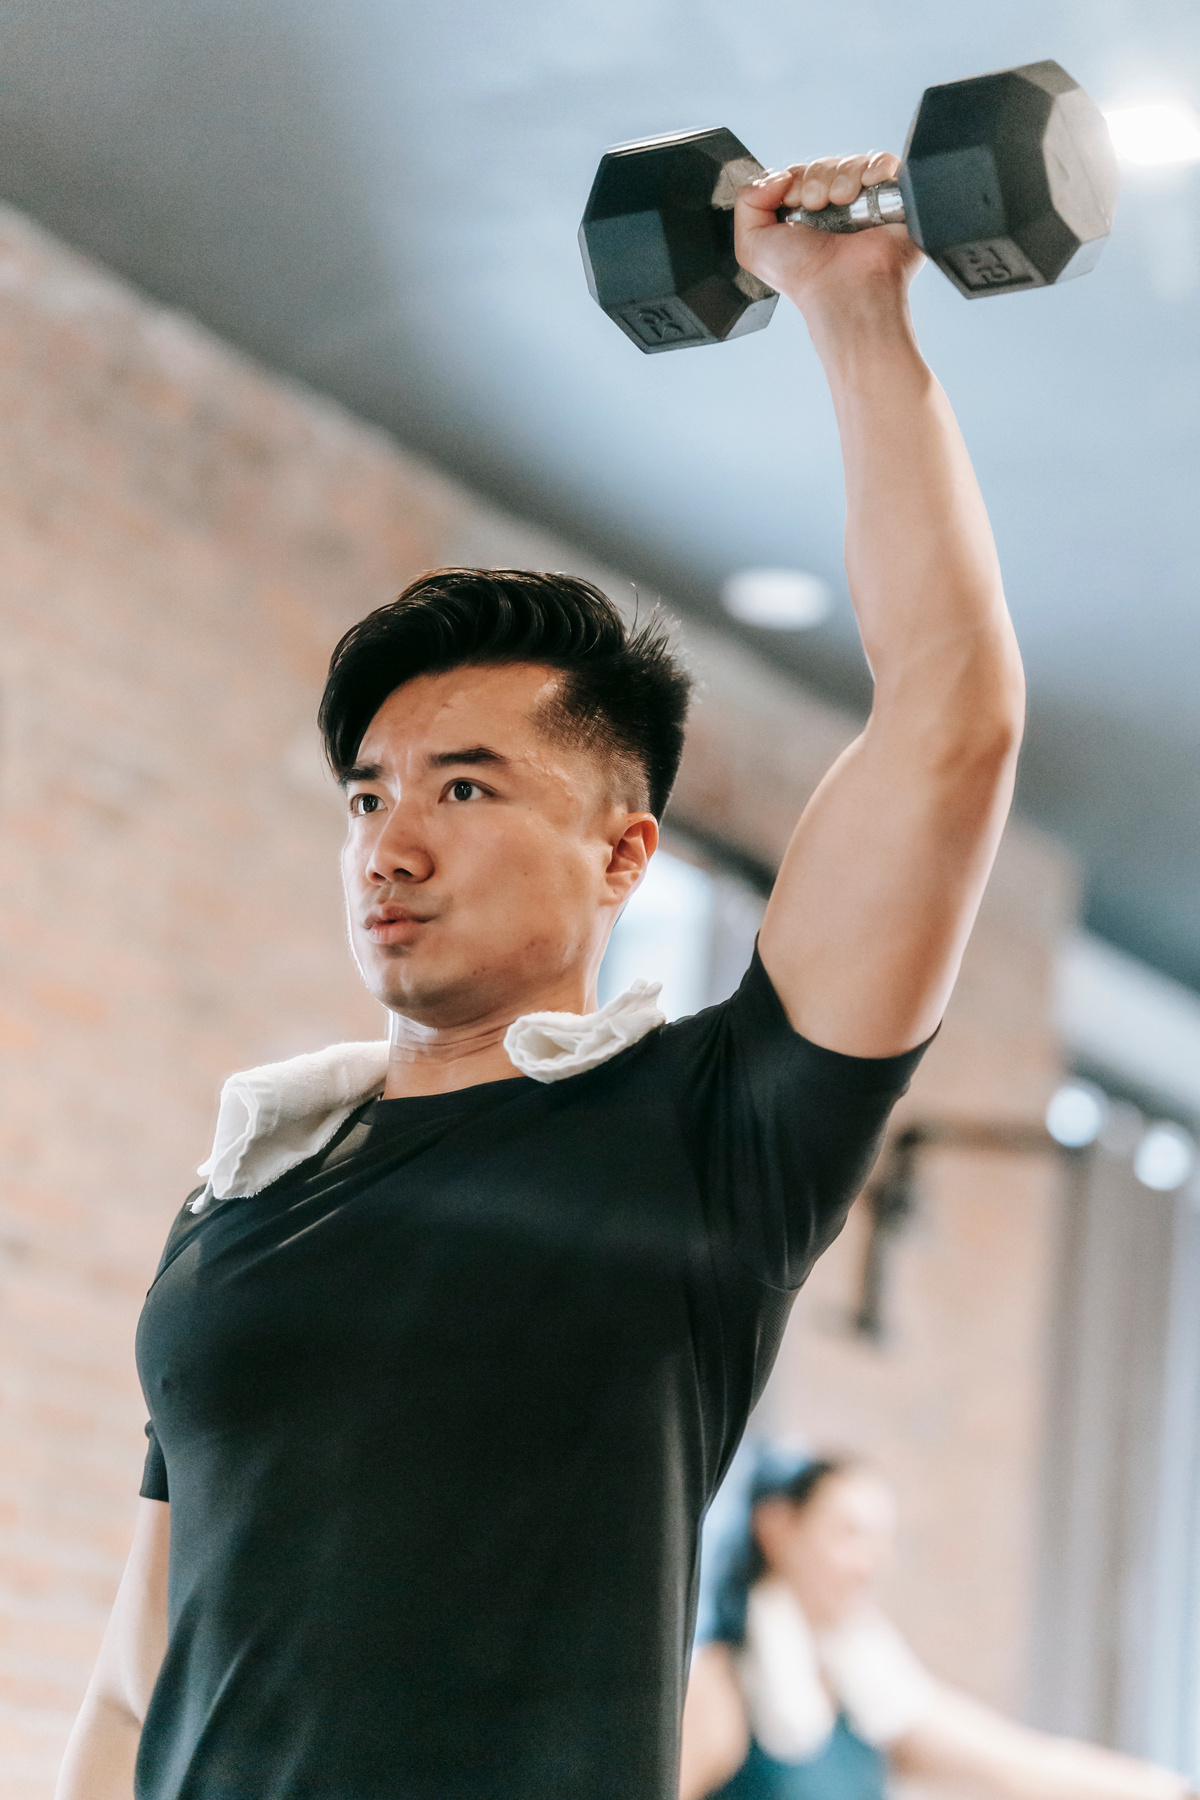 Asian man lifting heavy weight in gym